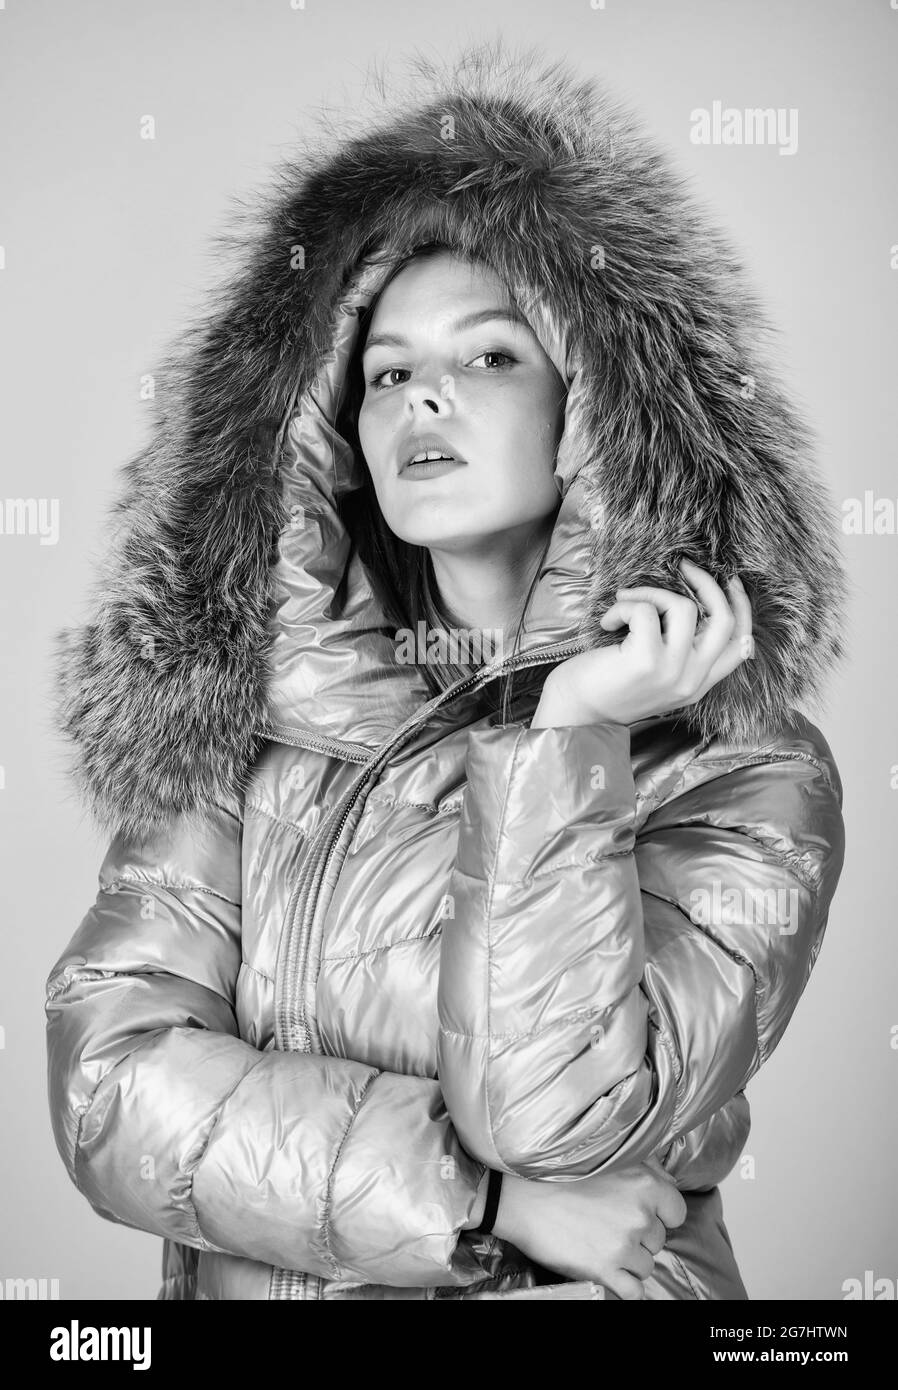 Faux fur. Warming up. Casual winter jacket slightly more stylish and have more comfort features such as larger hood fur trim on hood. Fashion girl win Stock Photo